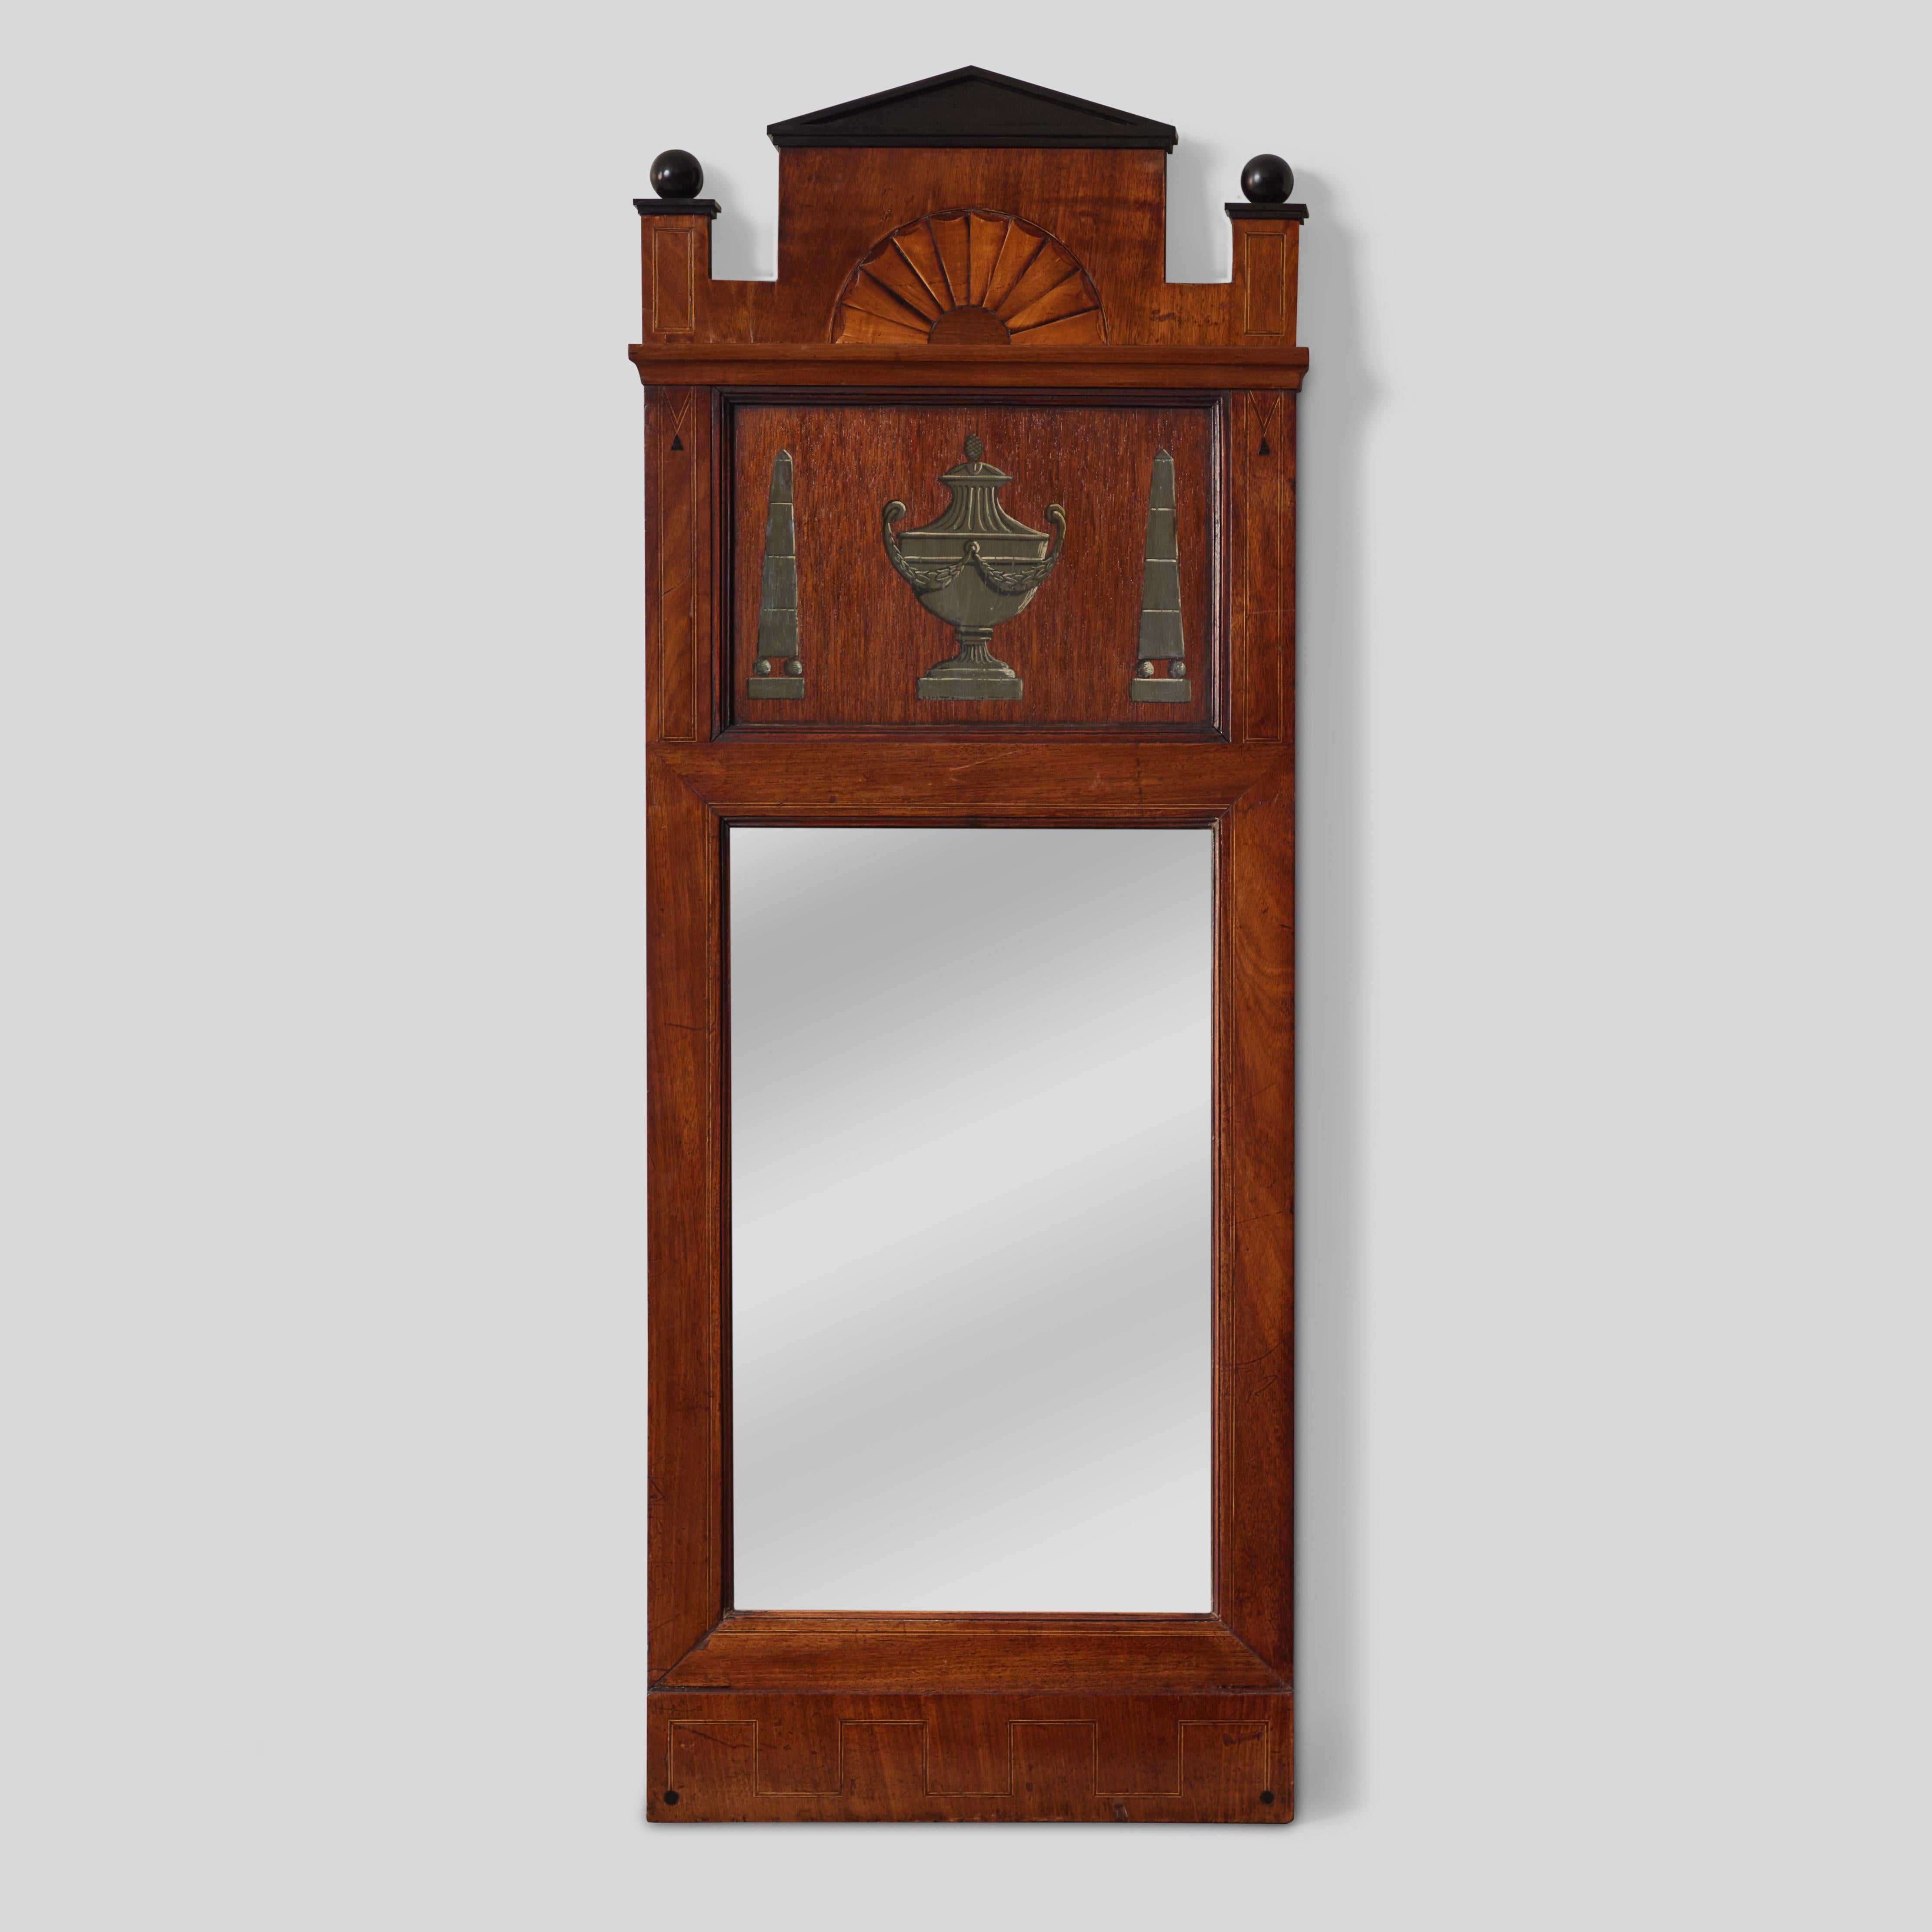 Rectangular wooden accent mirror from 1820s Italy in the Empire style. With its exceptionally refined painted trompe-l'oeil and inlay decoration, architectural schema, and delicate ebonized accents, this special piece has a whimsical yet elegant